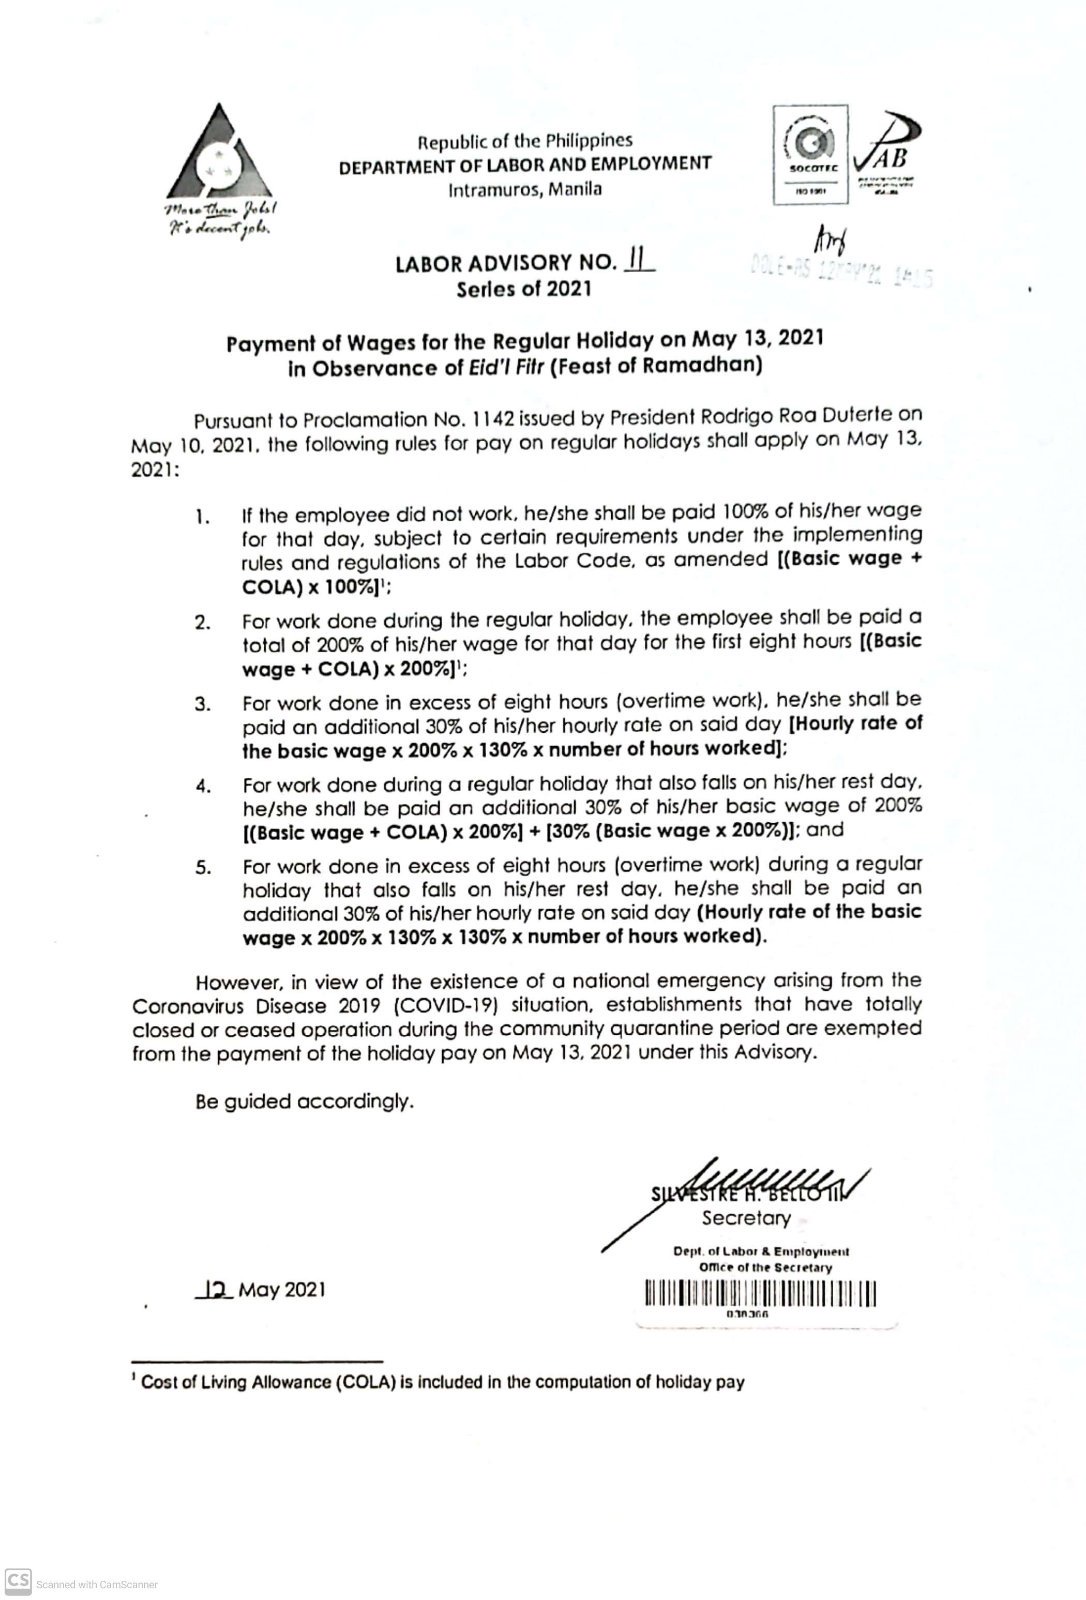 DOLE releases holiday pay rules for Eid’l Fitr Inquirer News